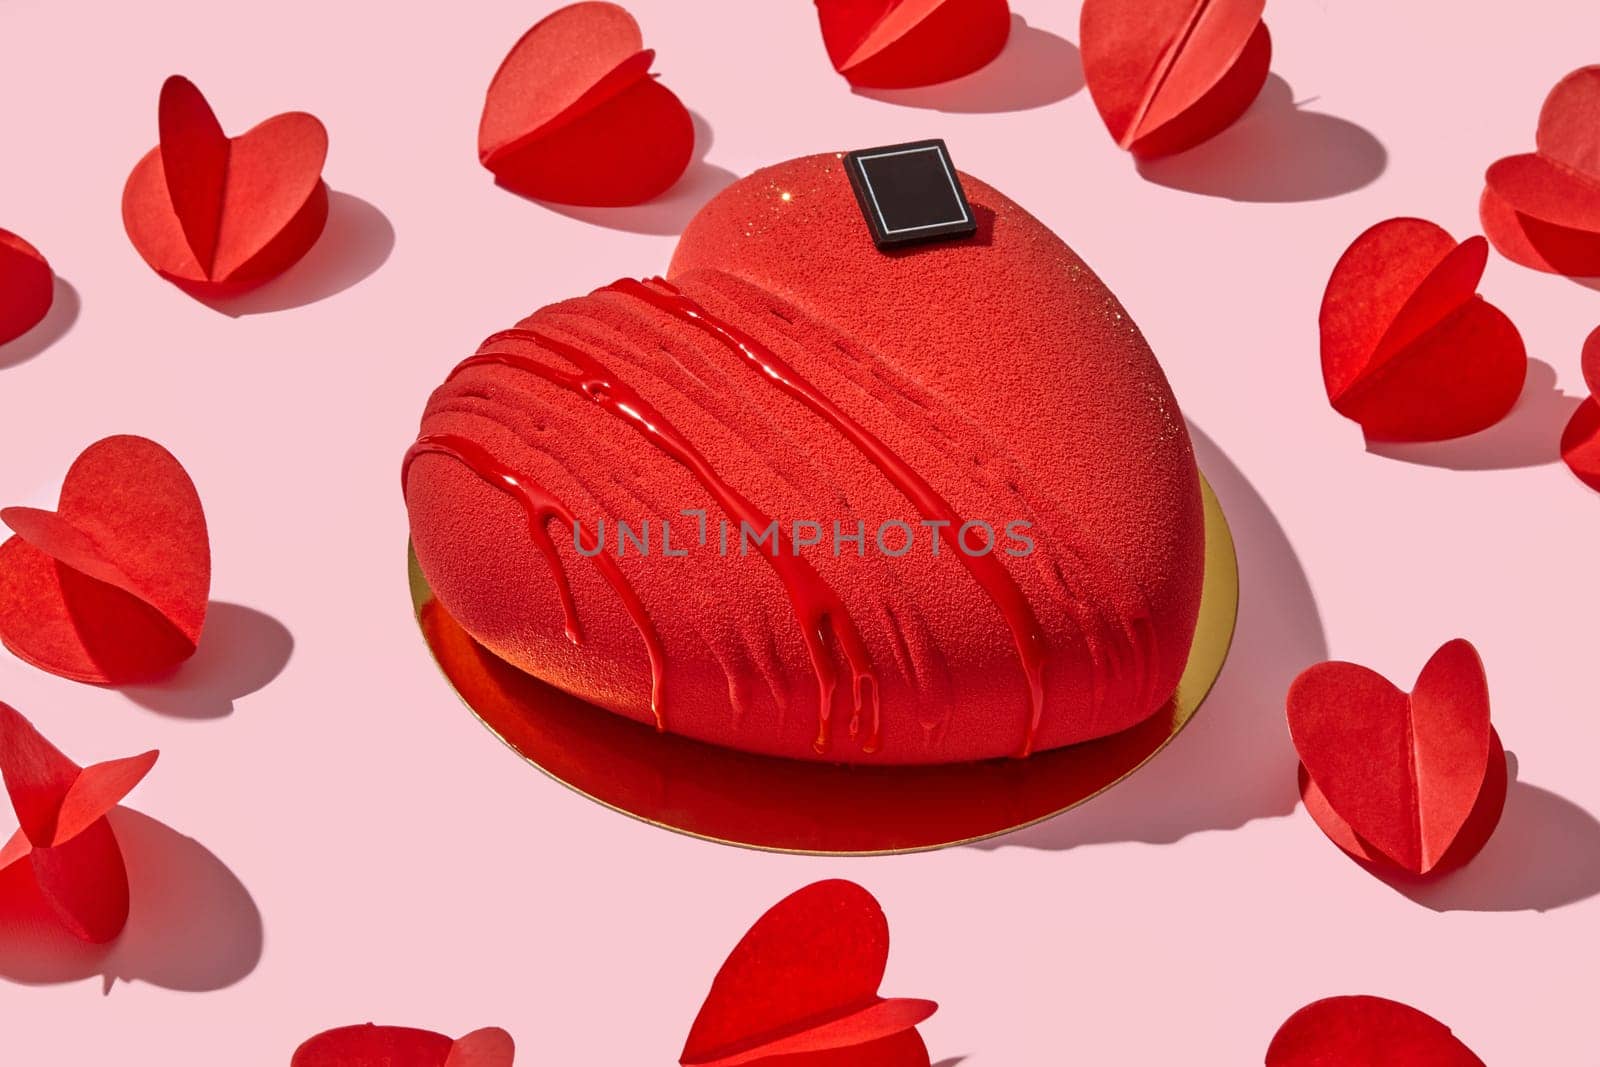 Bold red velvet heart-shaped mousse cake, presented on golden platform, amidst scattered paper hearts on delicate pink backdrop. Perfect for romantic celebrations and love-filled occasions